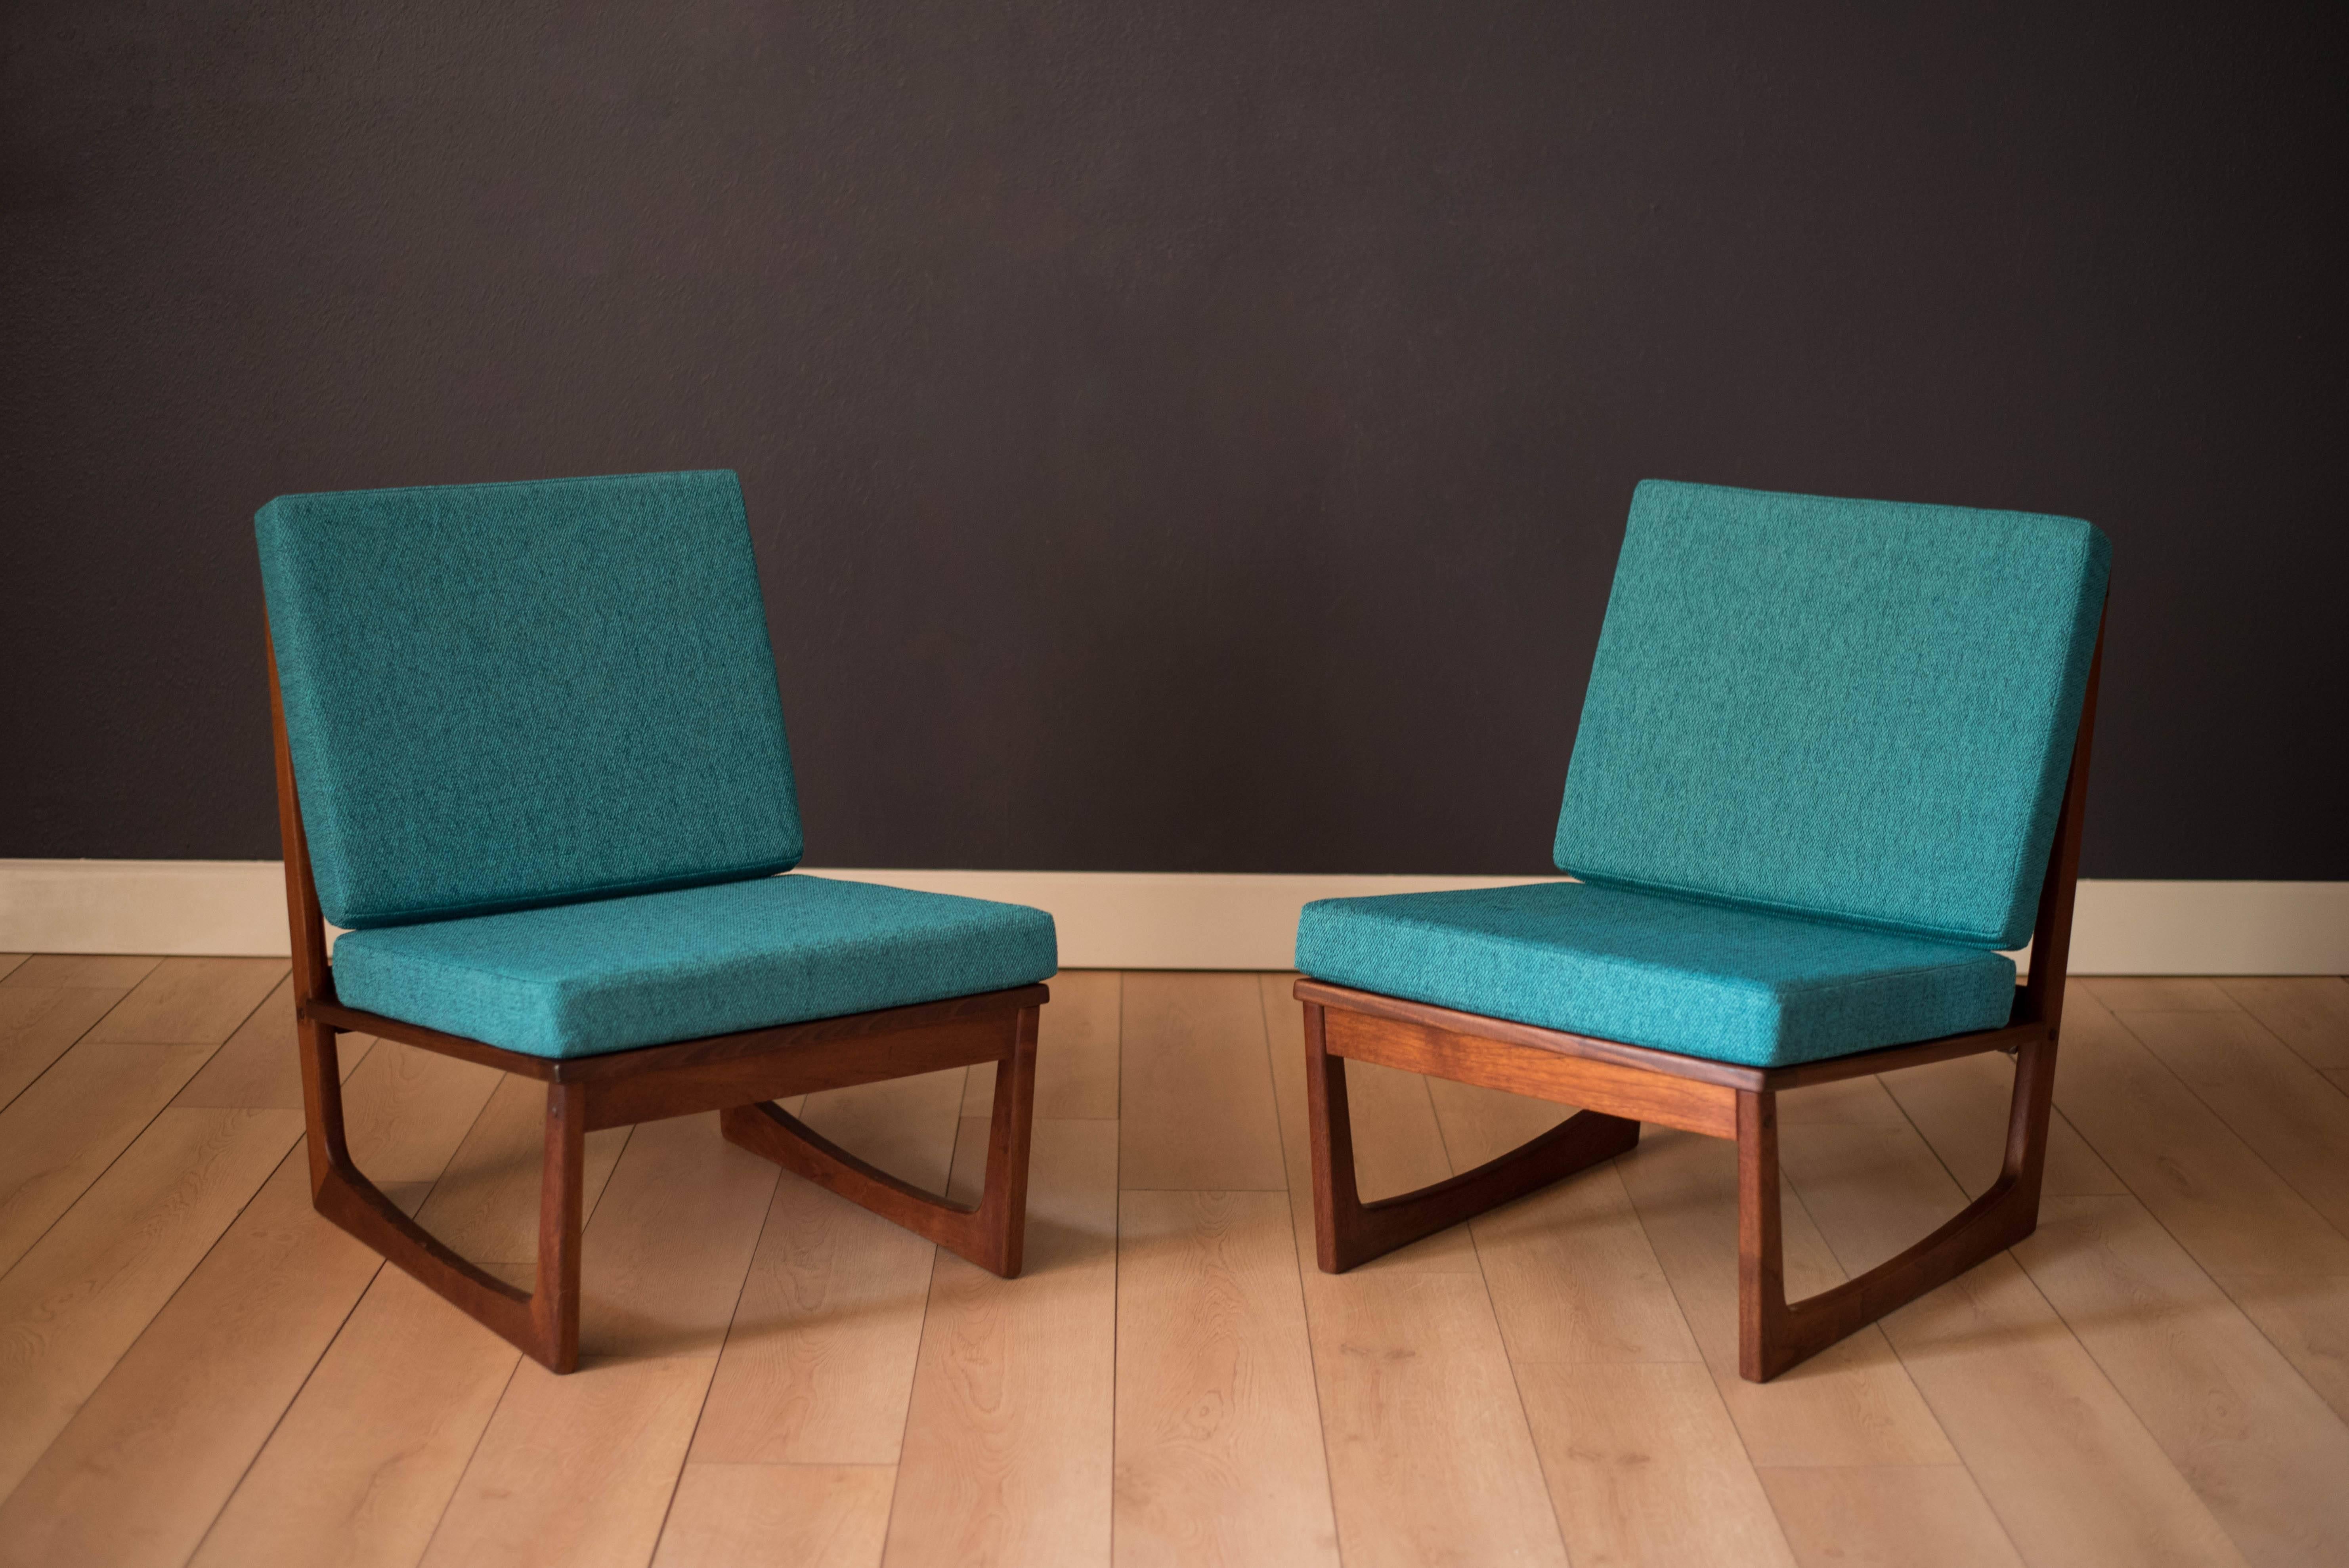 Danish slipper lounge chairs in solid teak by Jacob Kjaer. This pair has been professionally reupholstered in a woven teal fabric. Price is for the pair. 

